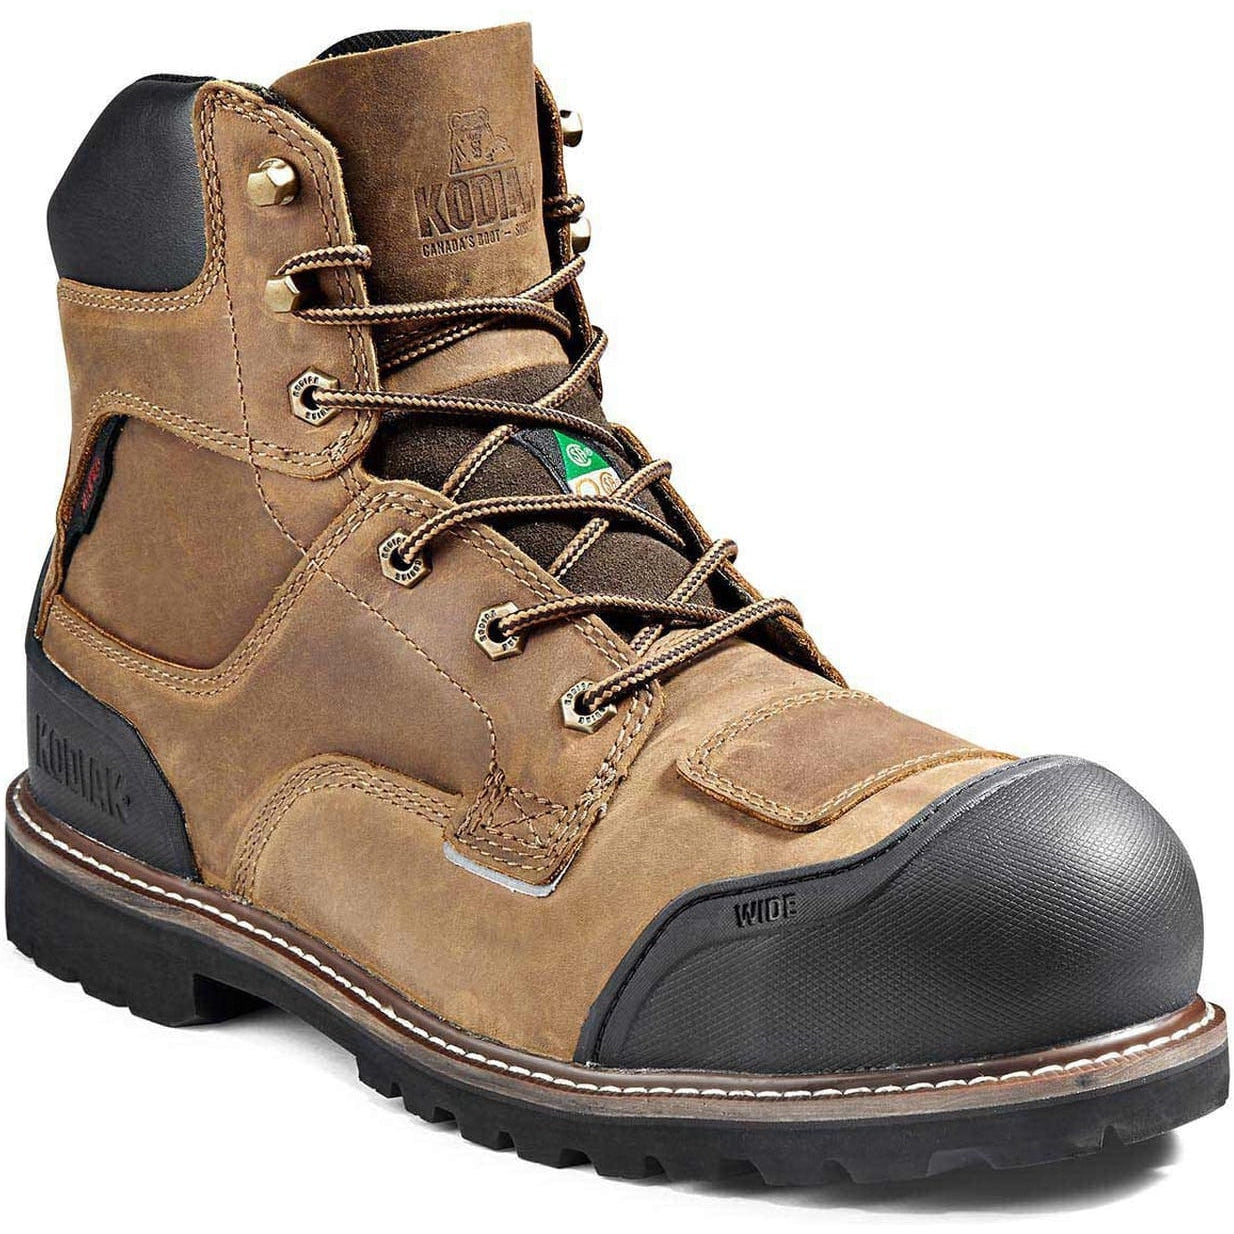 Kodiak Work Boots & Safety Shoes | Overlook Boots – Page 2